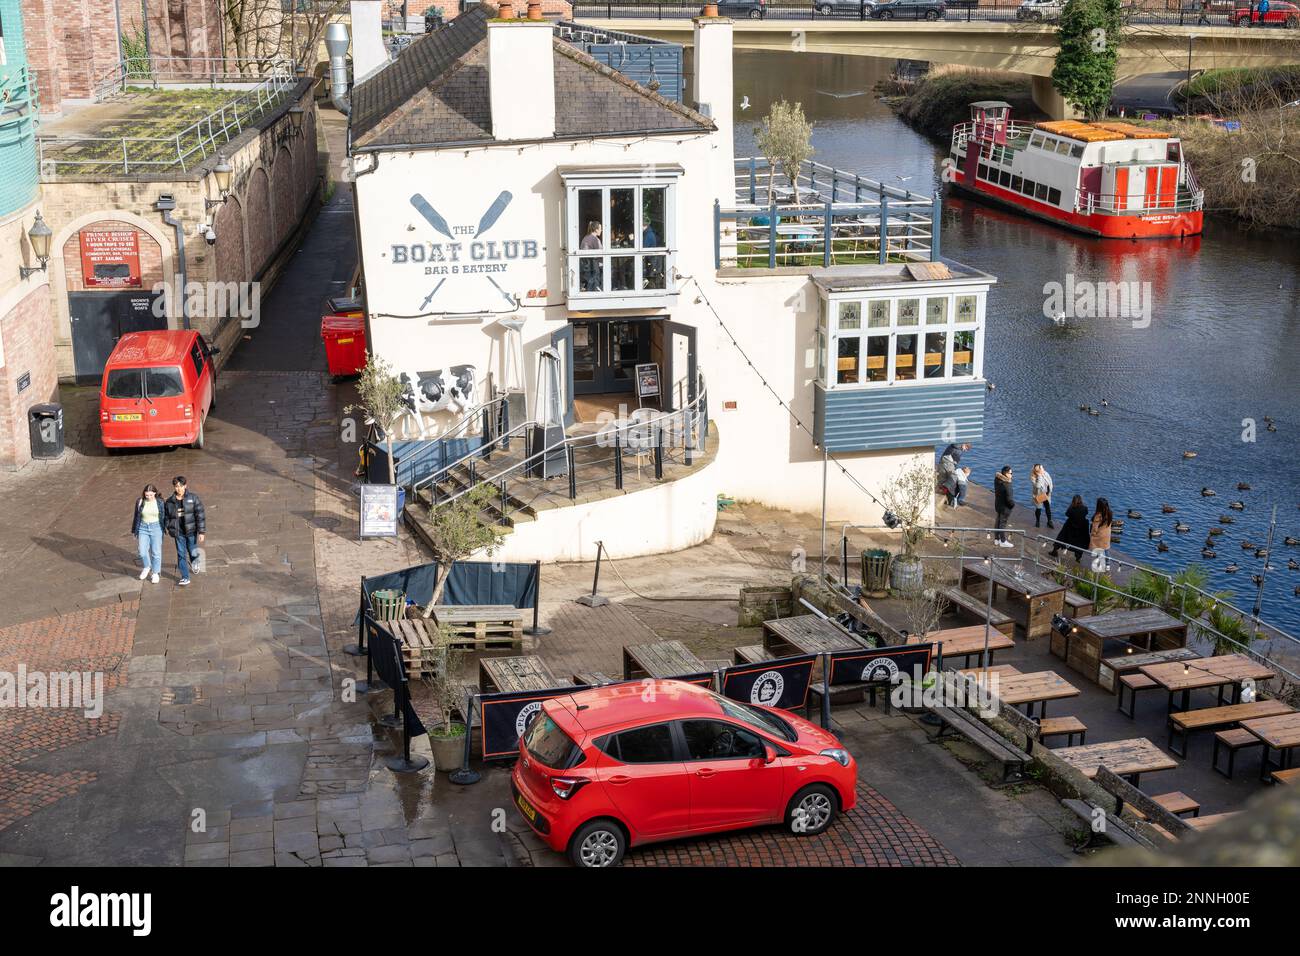 Exterior view of The Boat Club - a riverfront cocktail bar and restaurant in the city of Durham, UK. Stock Photo